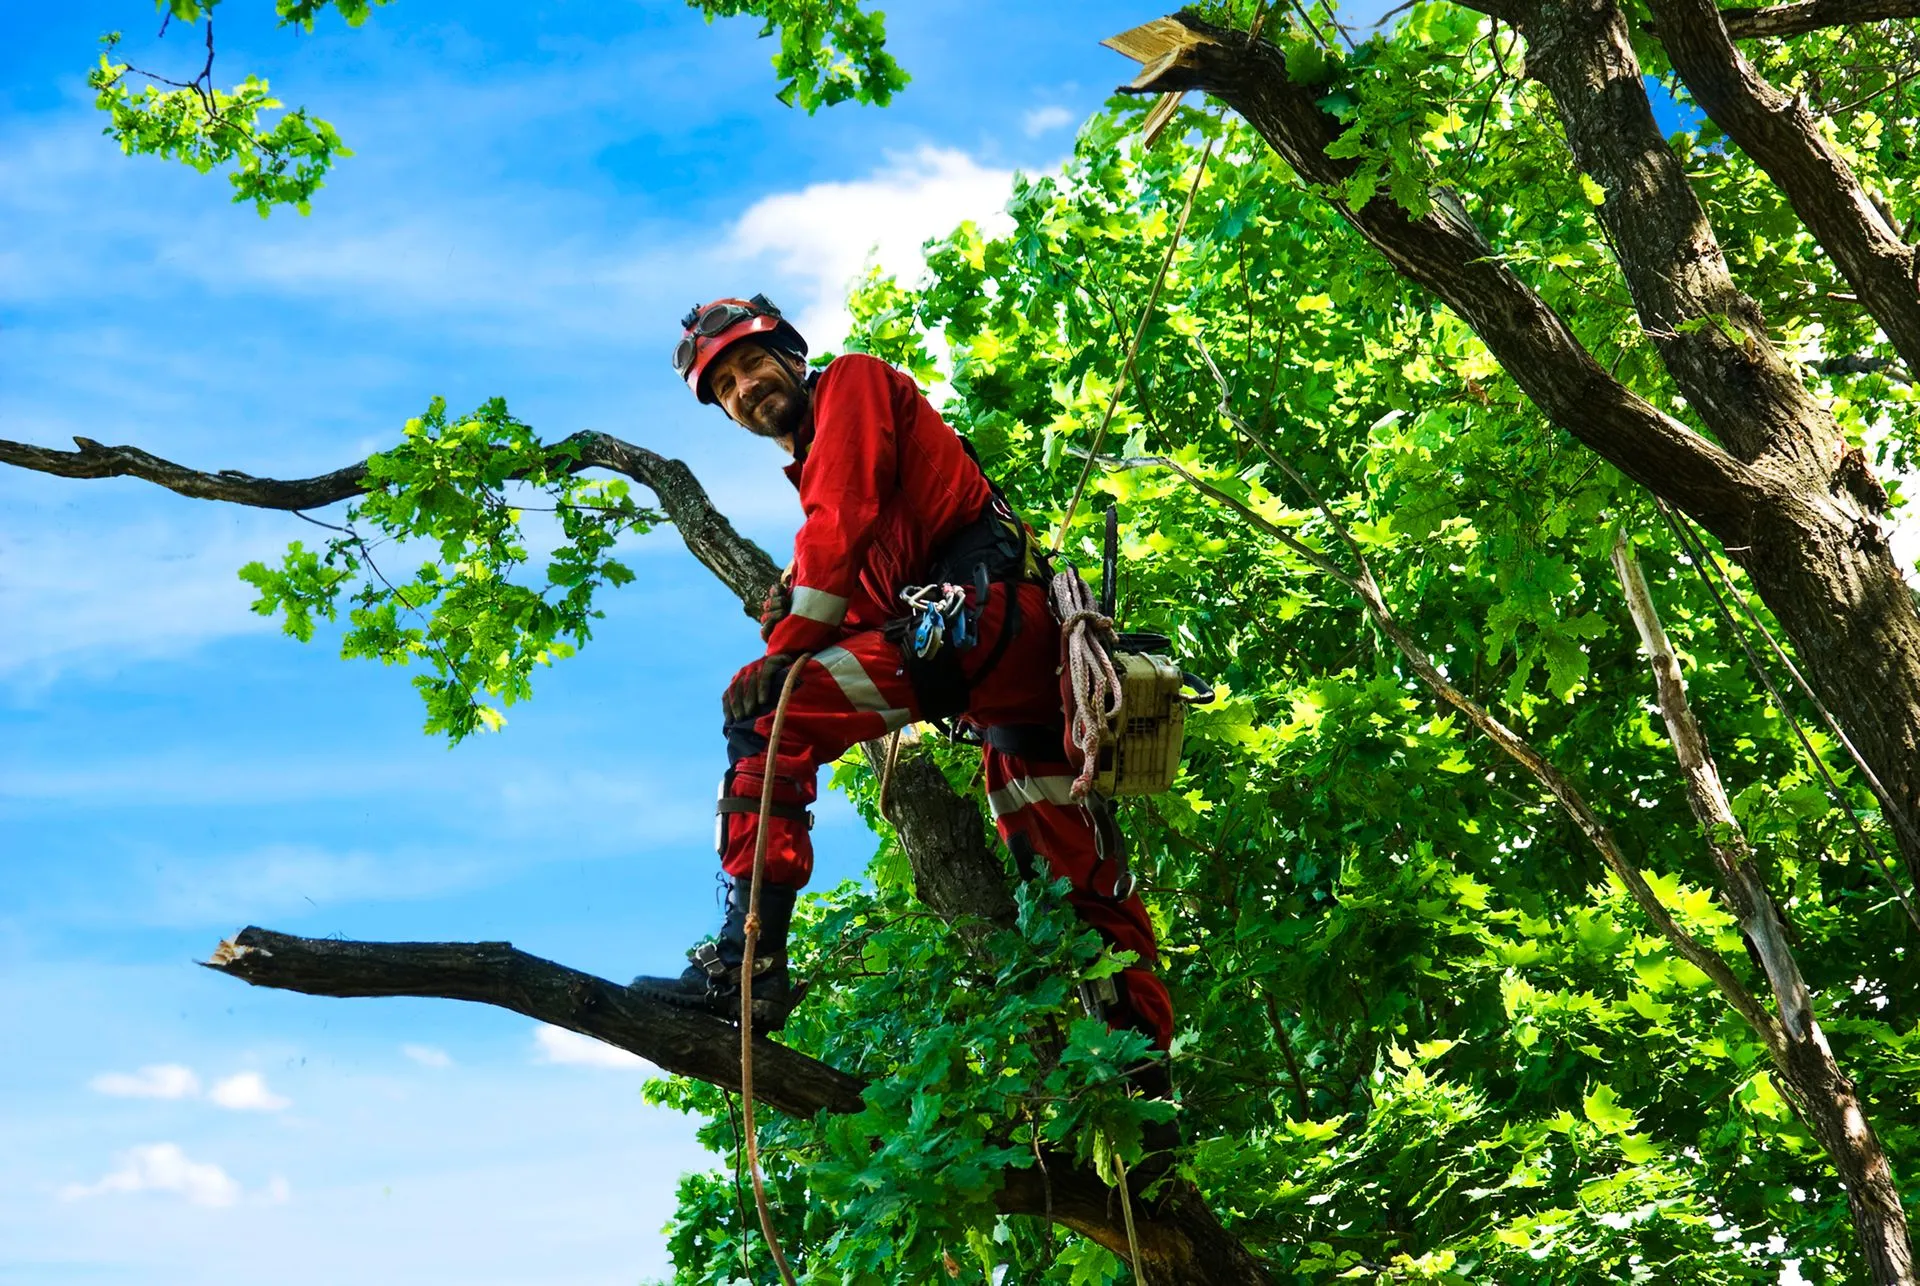 tree care professional looking at camera while in tree whith ropes and climbing equipment